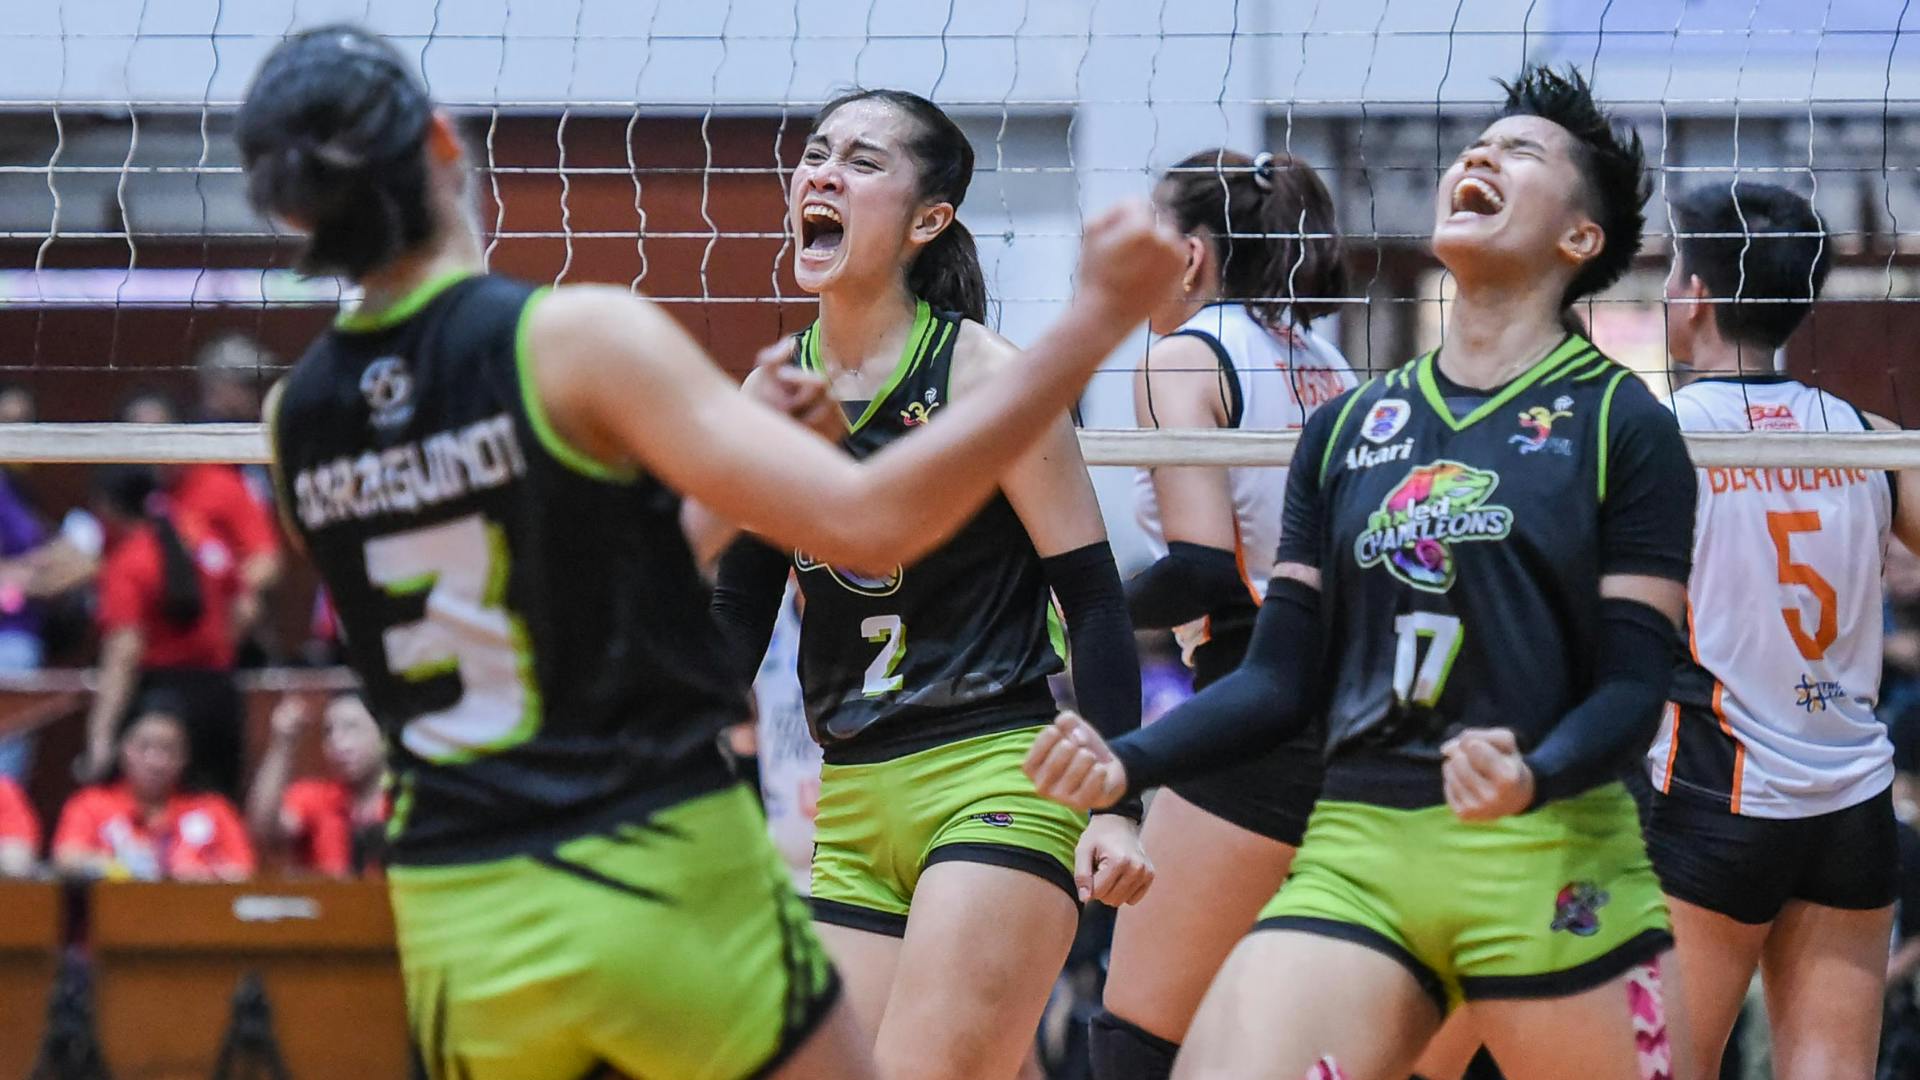 Nxled turns back Ateneo, secures Akari Invitational Cup bronze